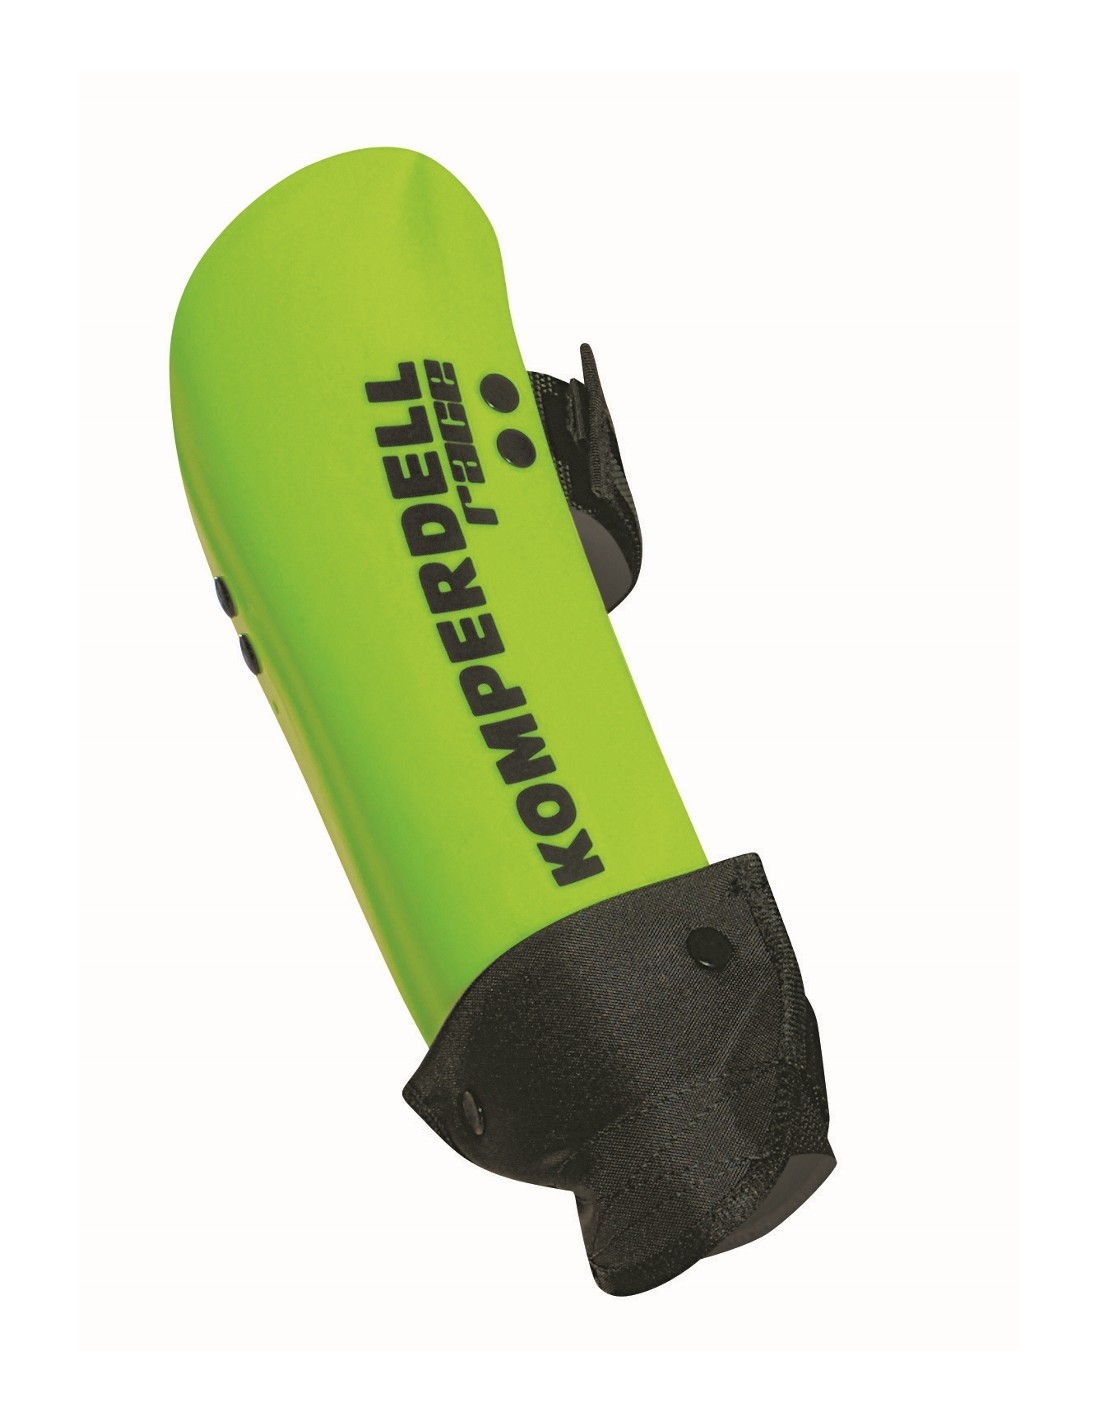 Protection Racing Komperdell Protege Tibia Wc Adulte Green